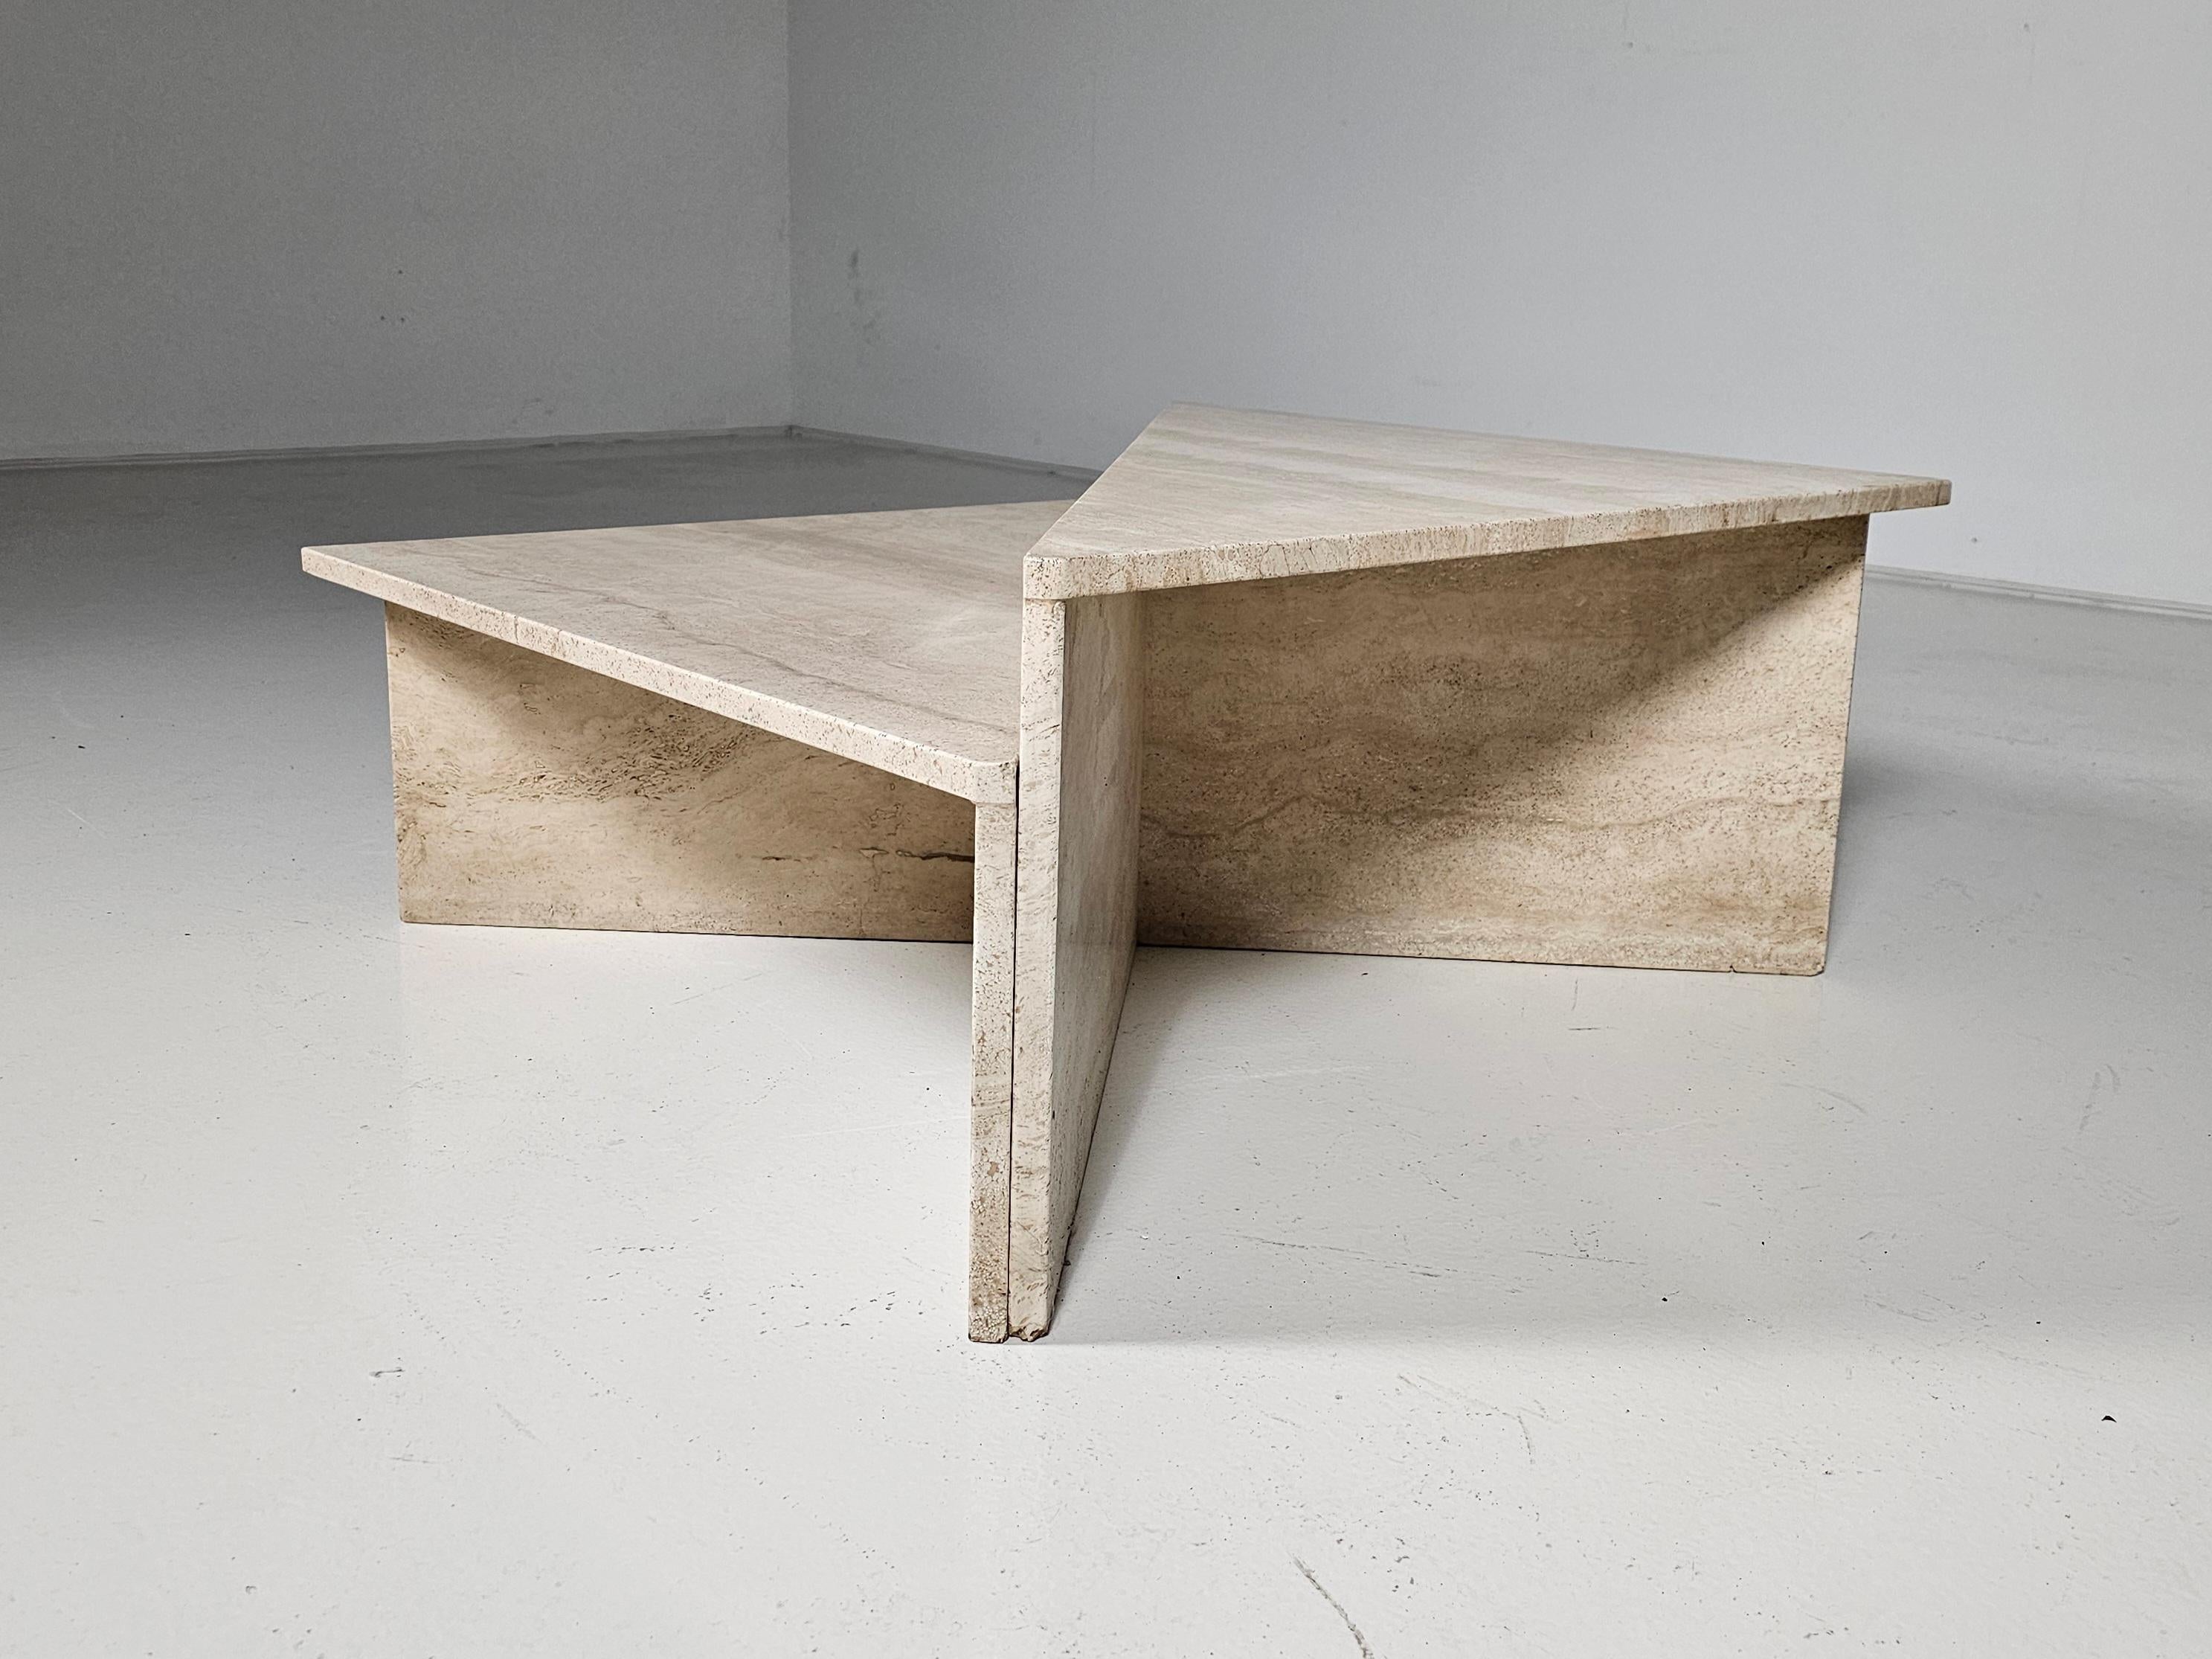 Italian sculptural two-part modern travertine coffee tables from the 1970s. 

It showcases a beautiful travertine grain that offers a soft contrast. The grain gently softens the angular forms with an organic air that's clean and calming. The Modular